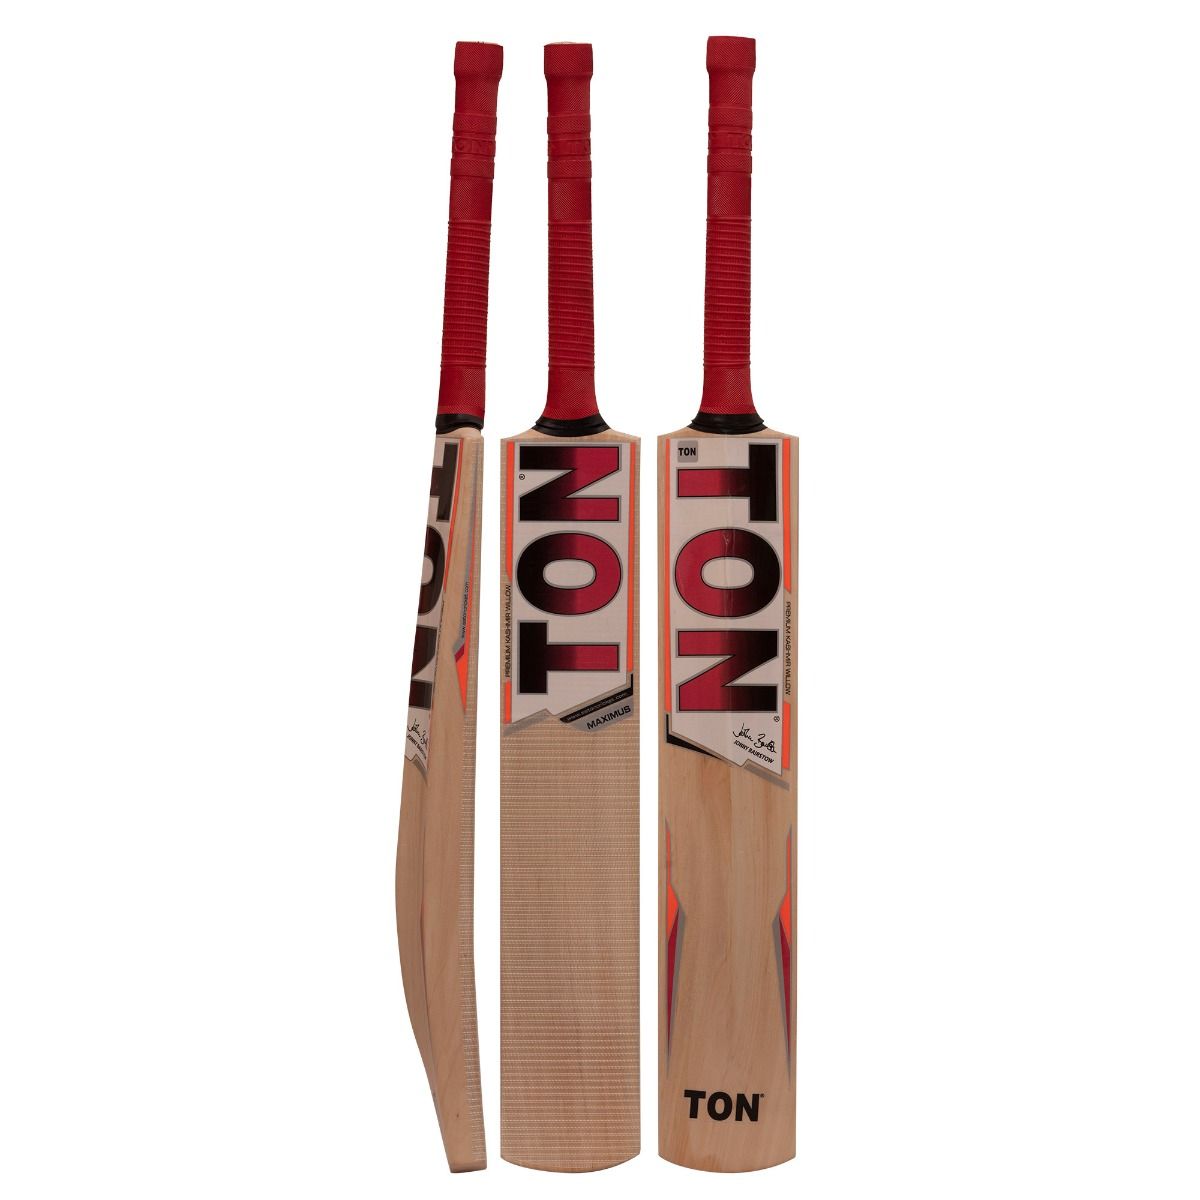 Details about   SS TON Maximus Cover Included TON Kashmir Willow Cricket Bat 